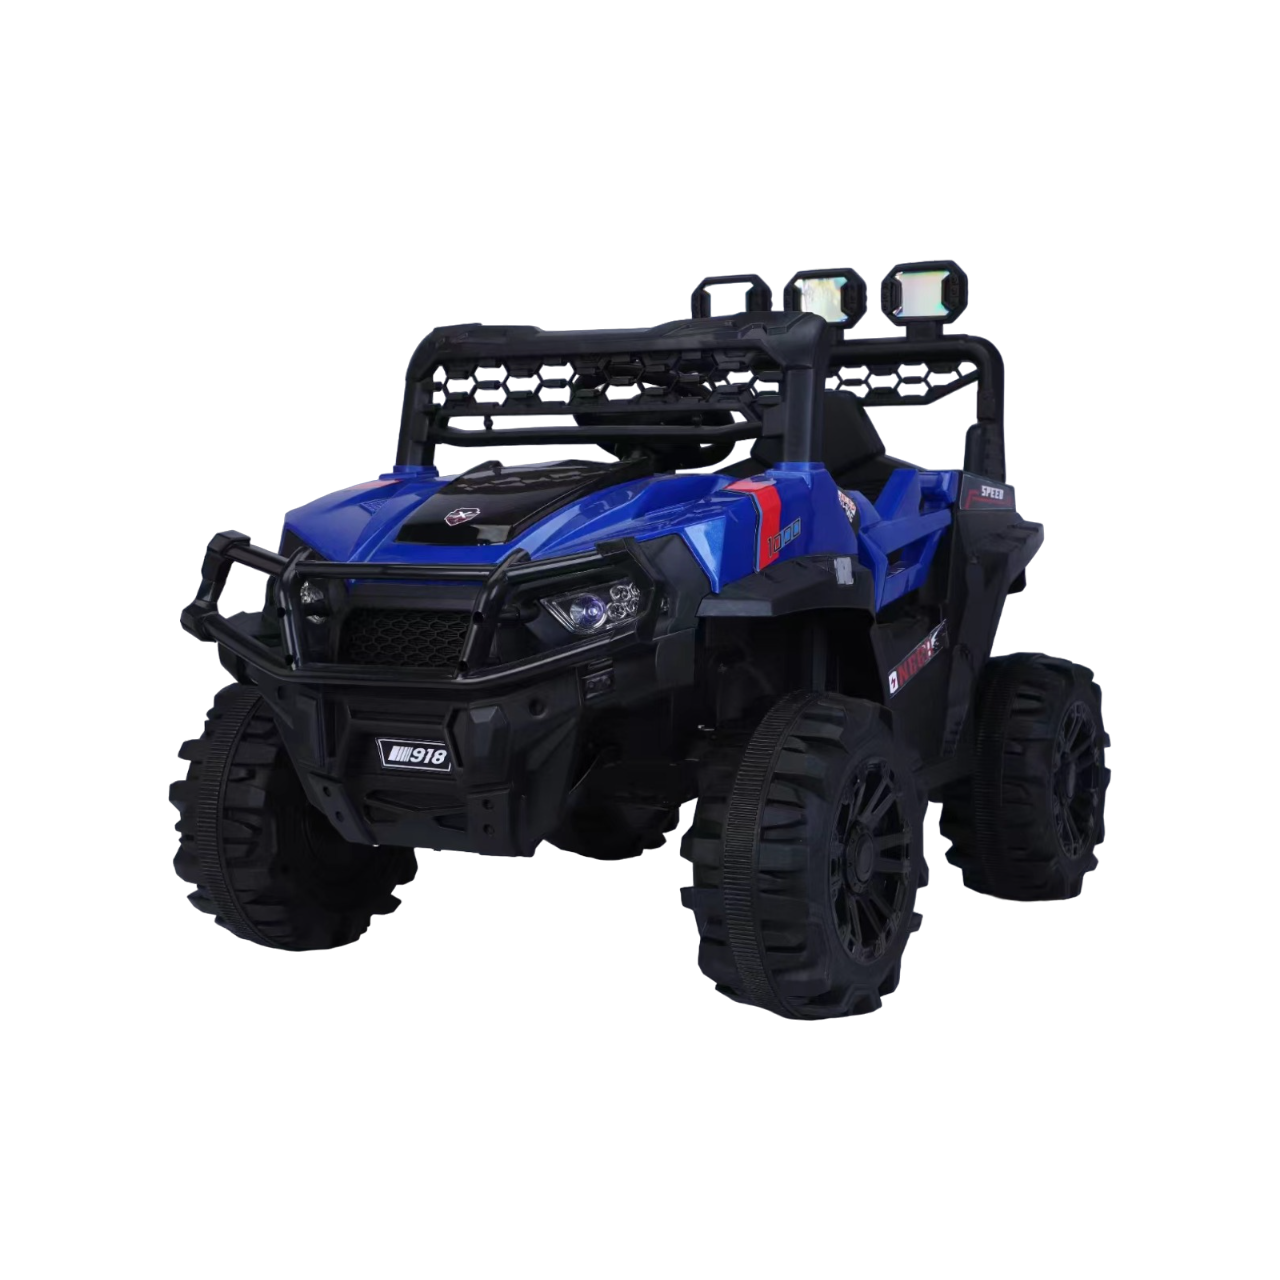 Pibi 4 x4 Single Seater SUV Truck Ride On with Remote Control 909 Blue Age- 2 Years & Above